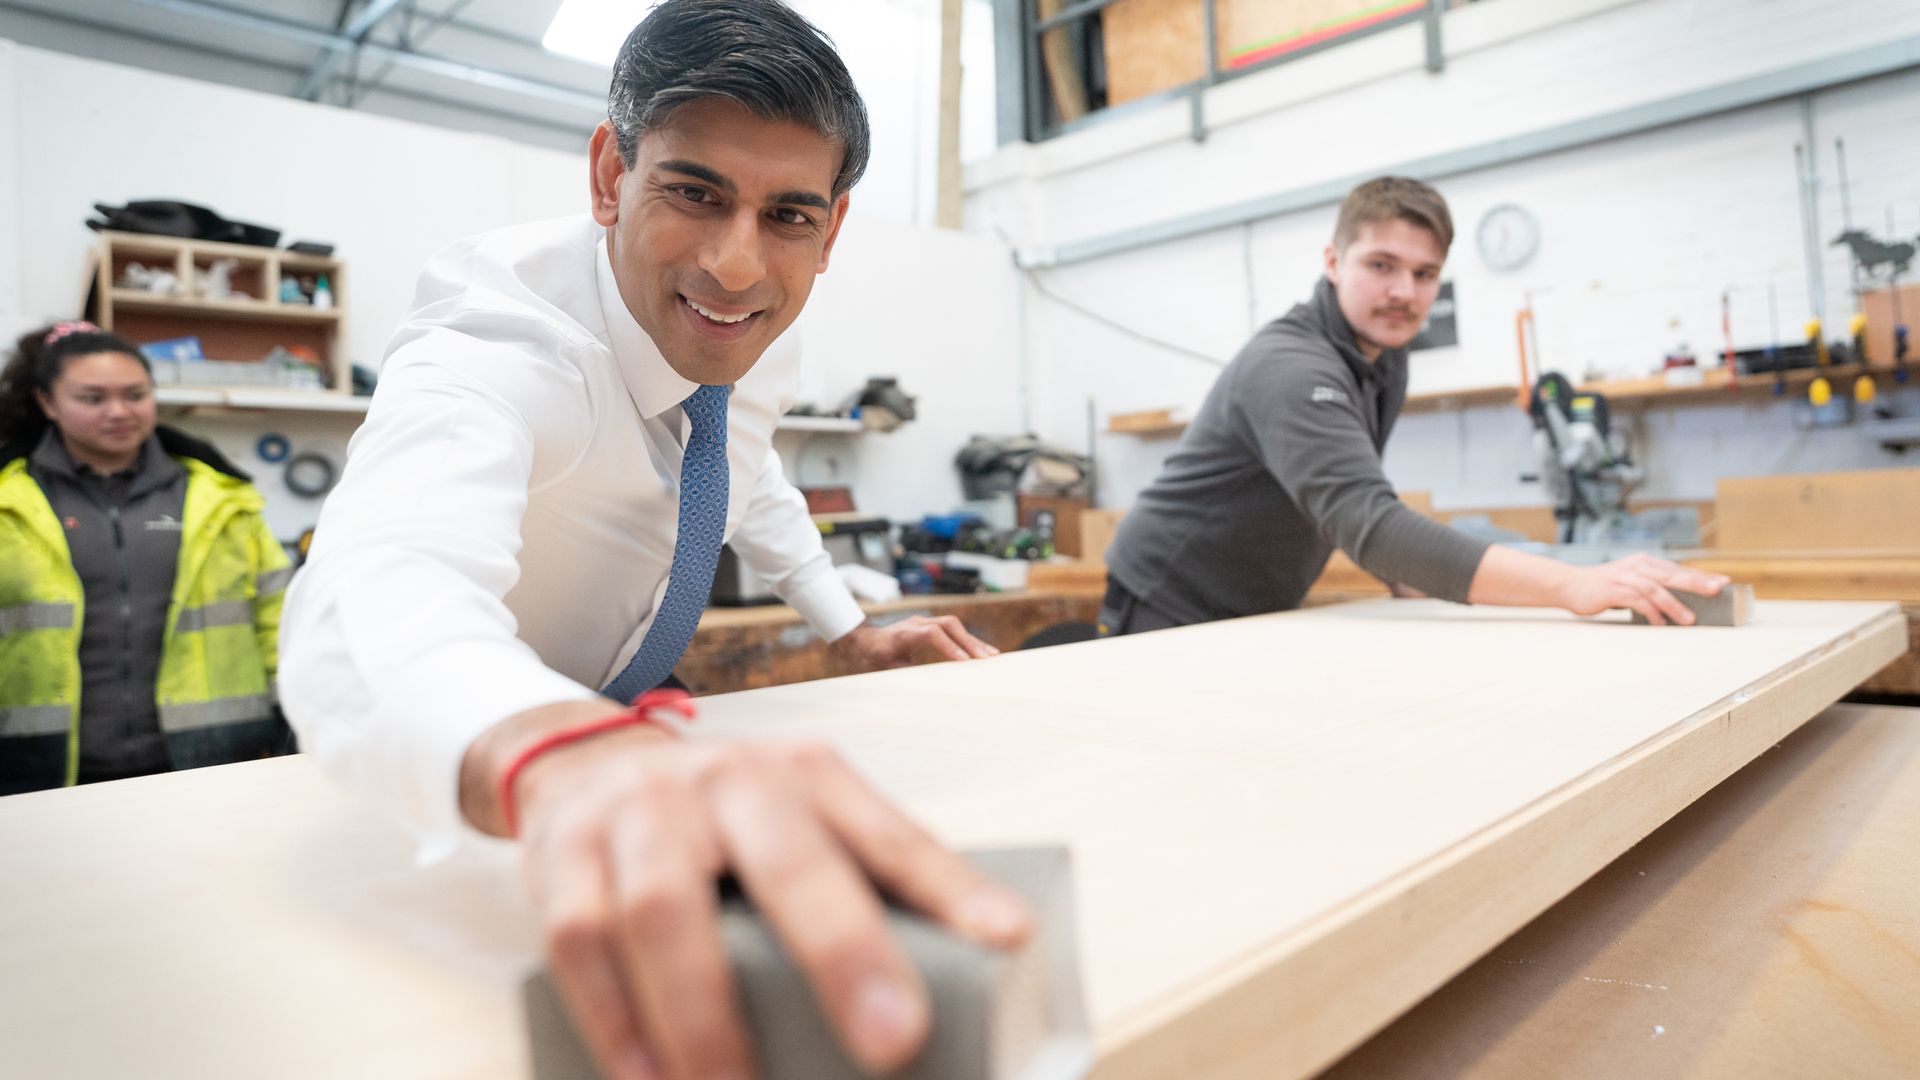 Tories want to replace 'rip-off degrees' with 100,000 new apprentices a year...